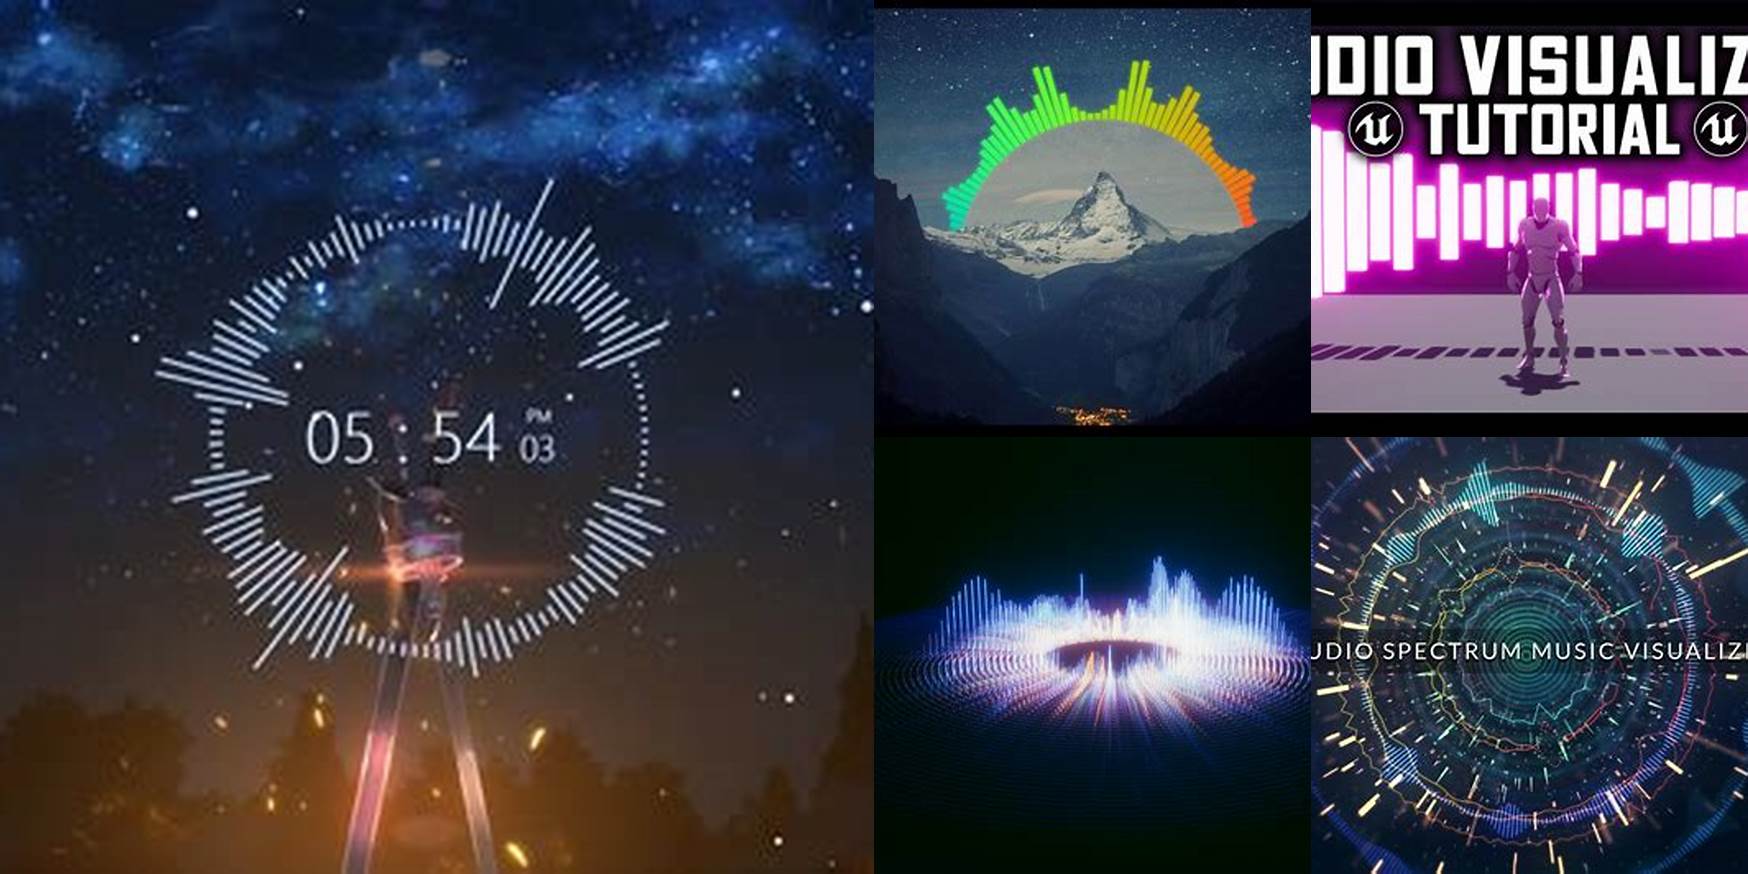 How To Make Audio Visualizer Wallpaper Engine